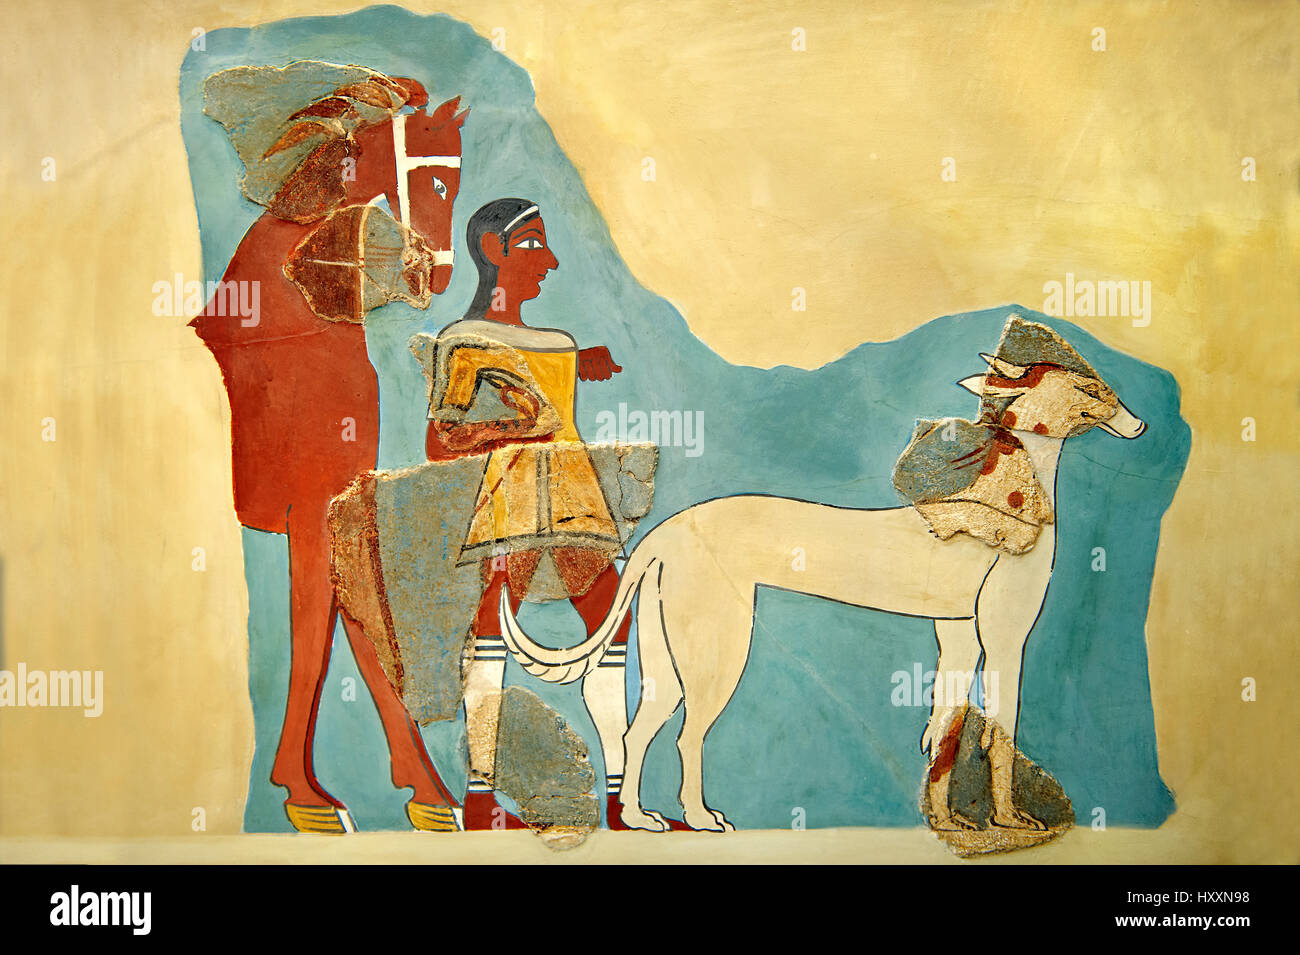 Mycenaean Fresco wall painting  of a Mycanaean with horse & wild boar hunting dog from the Tiryns, Greece. 14th - 13th Century BC. Athens Museum Stock Photo